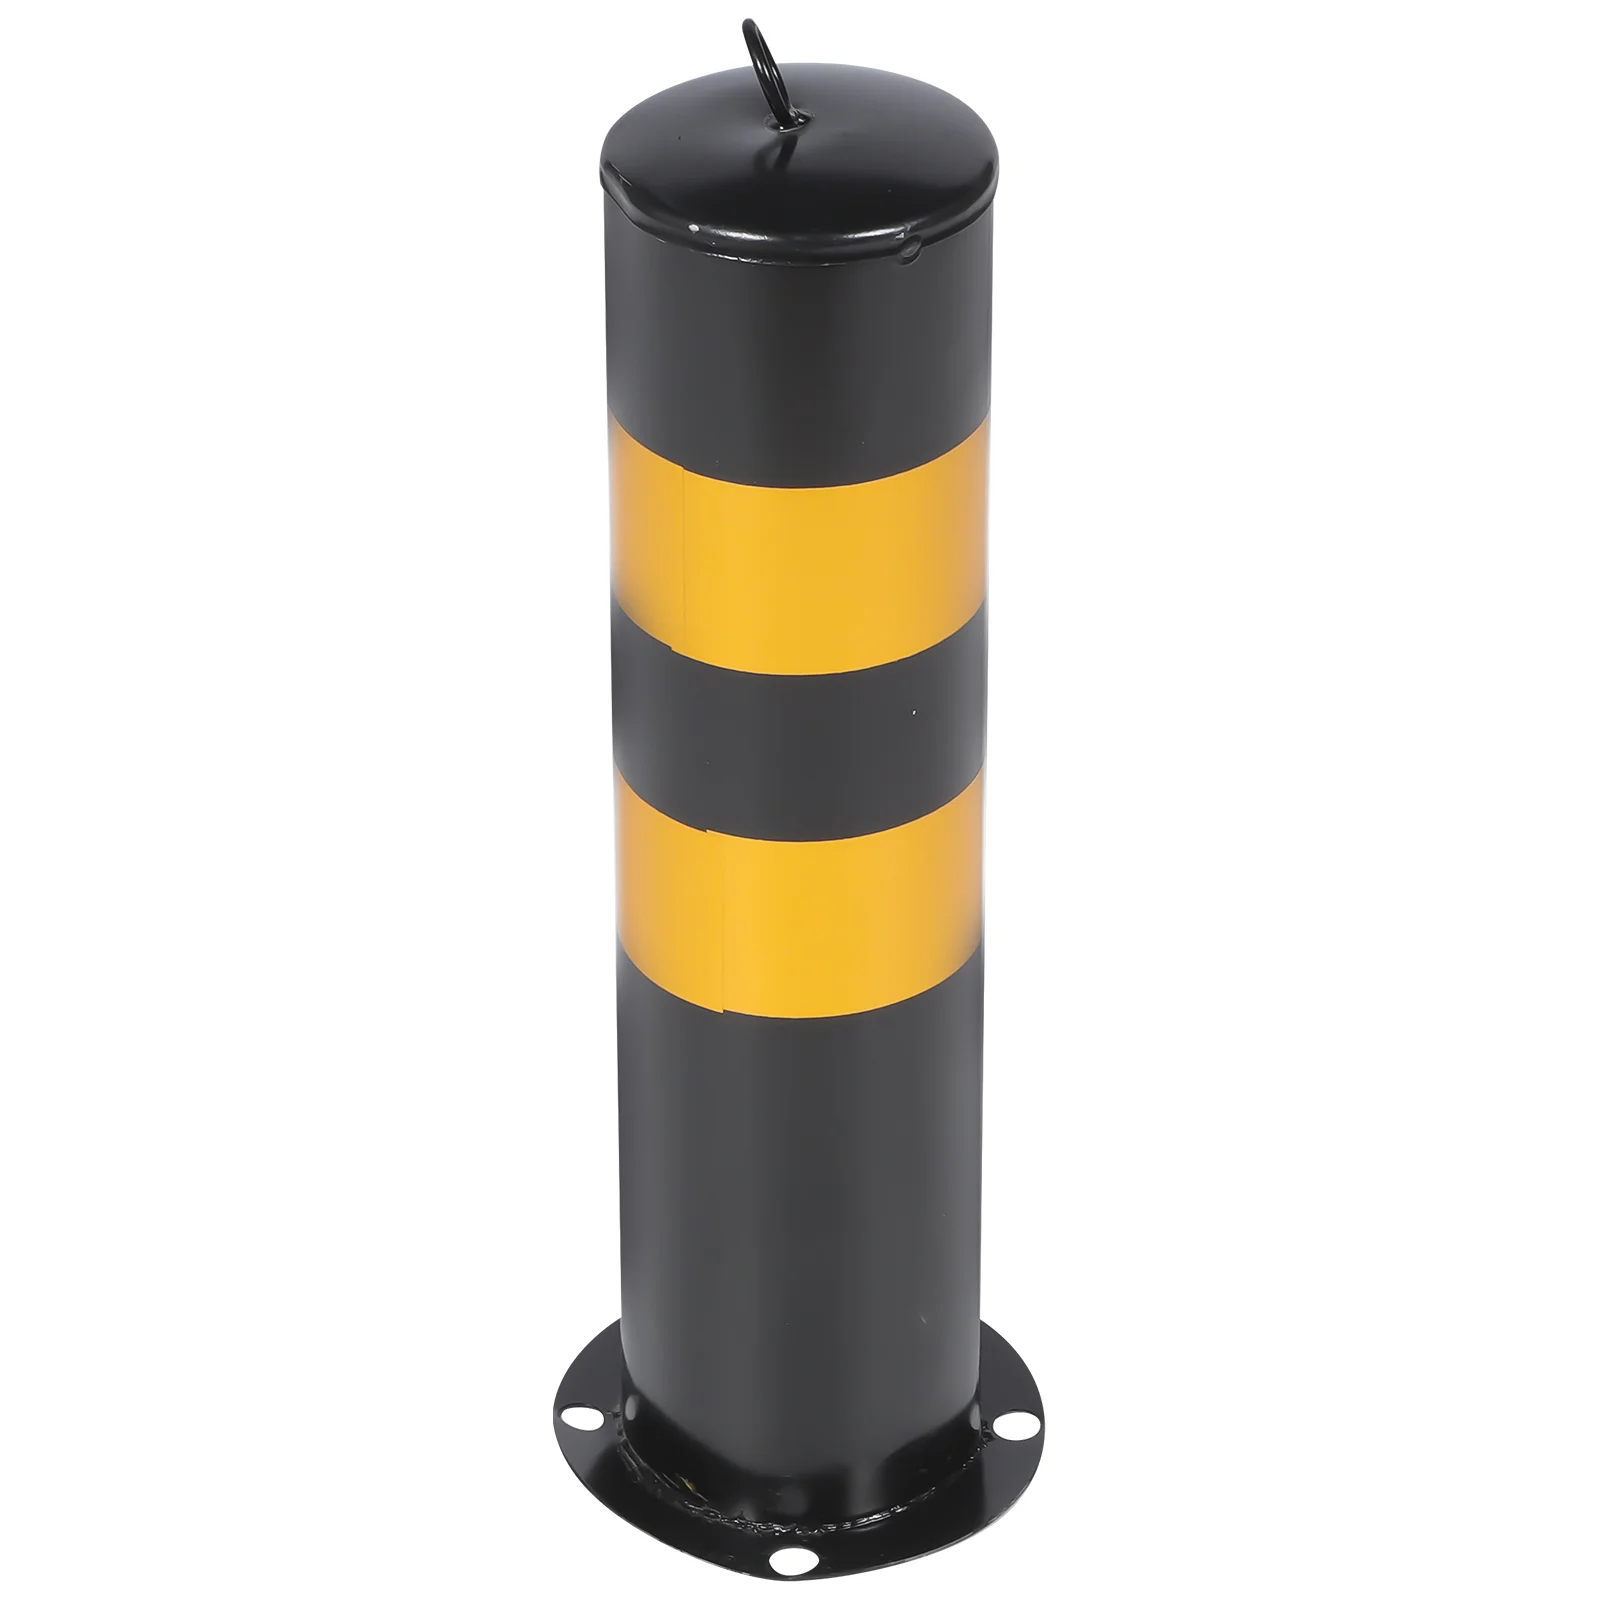 

Warning Post Barricades Parking Barrier Construction Cones Metal Fencing Bollards Fence Gate Driveway Guard Traffic Safety Road